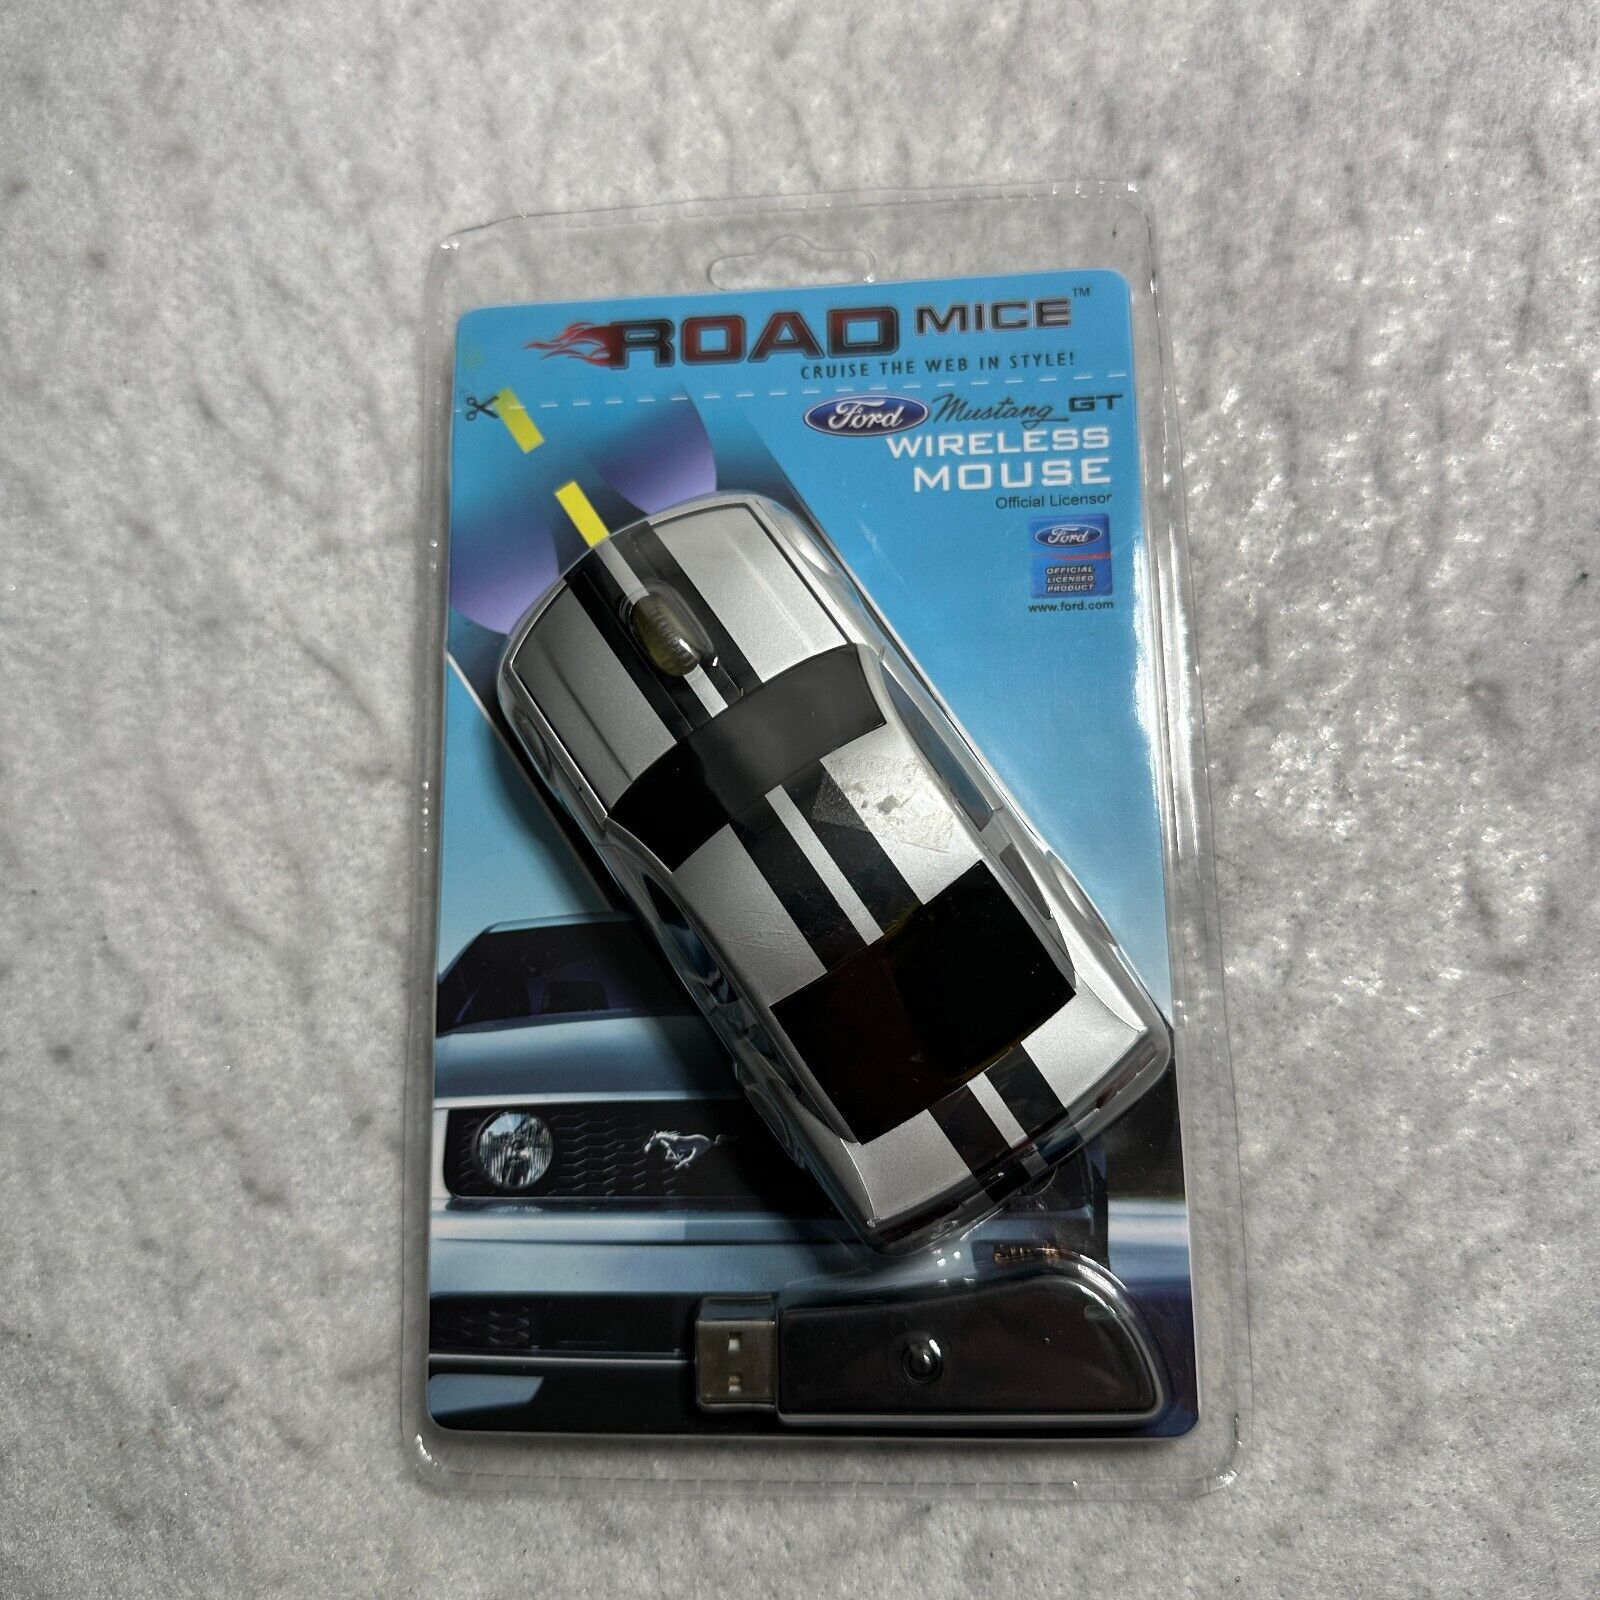 Road Mice ROADMICE Ford Mustang GT Wireless Mouse Vintage New In Box